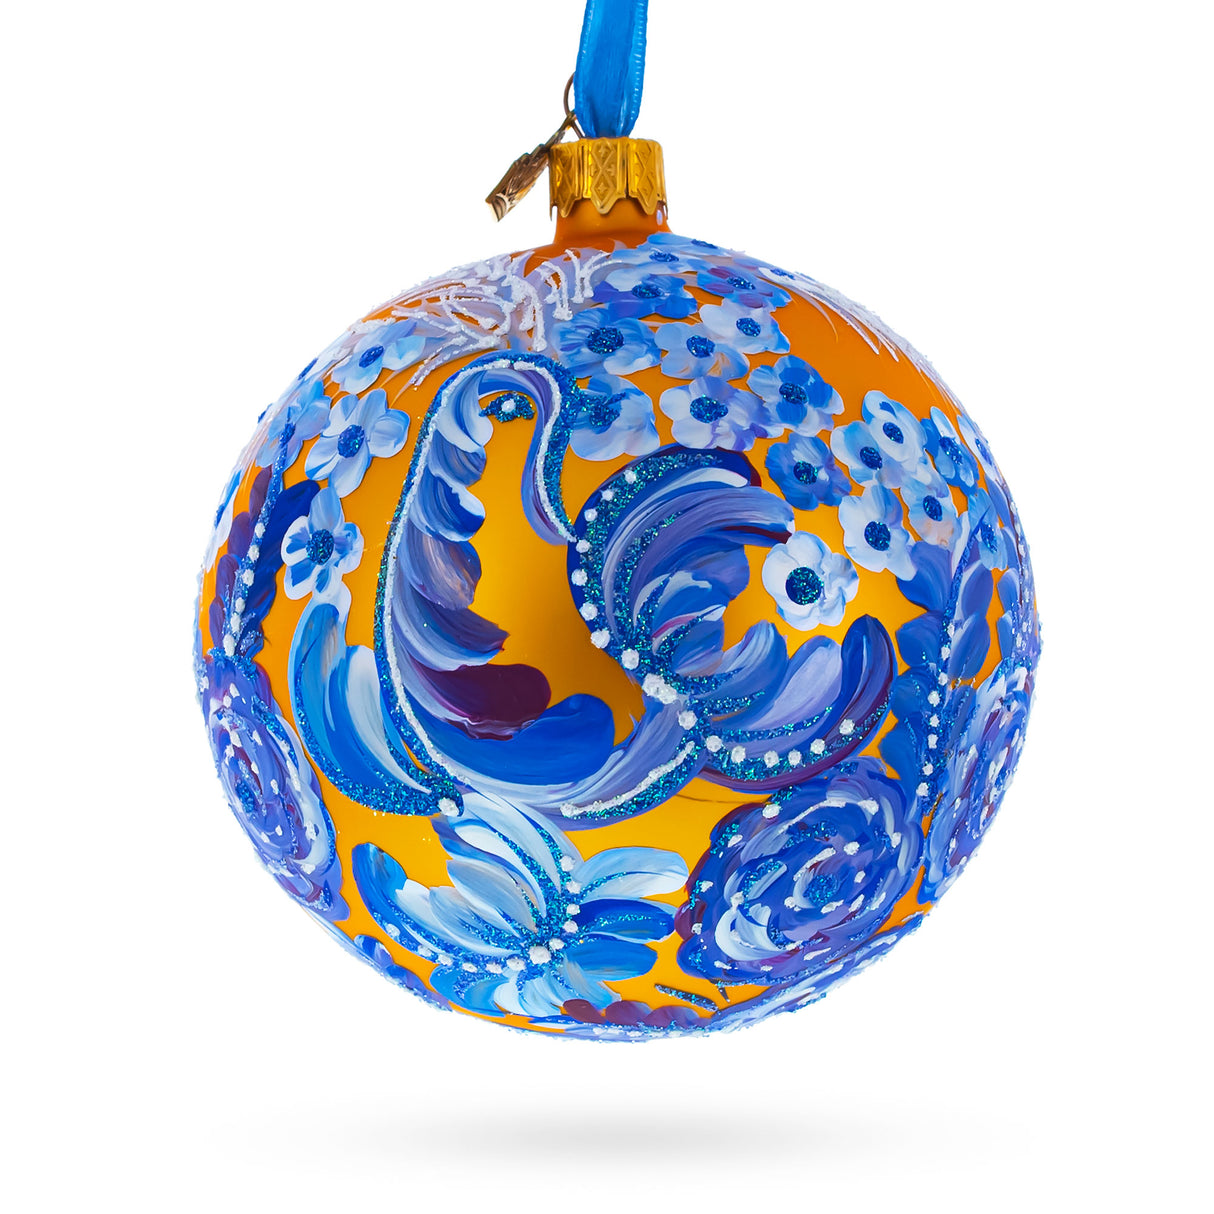 Majestic Firebird Amidst Hyacinth Flowers - Artisan Blown Glass Ball Christmas Ornament in Multi color, Round shape